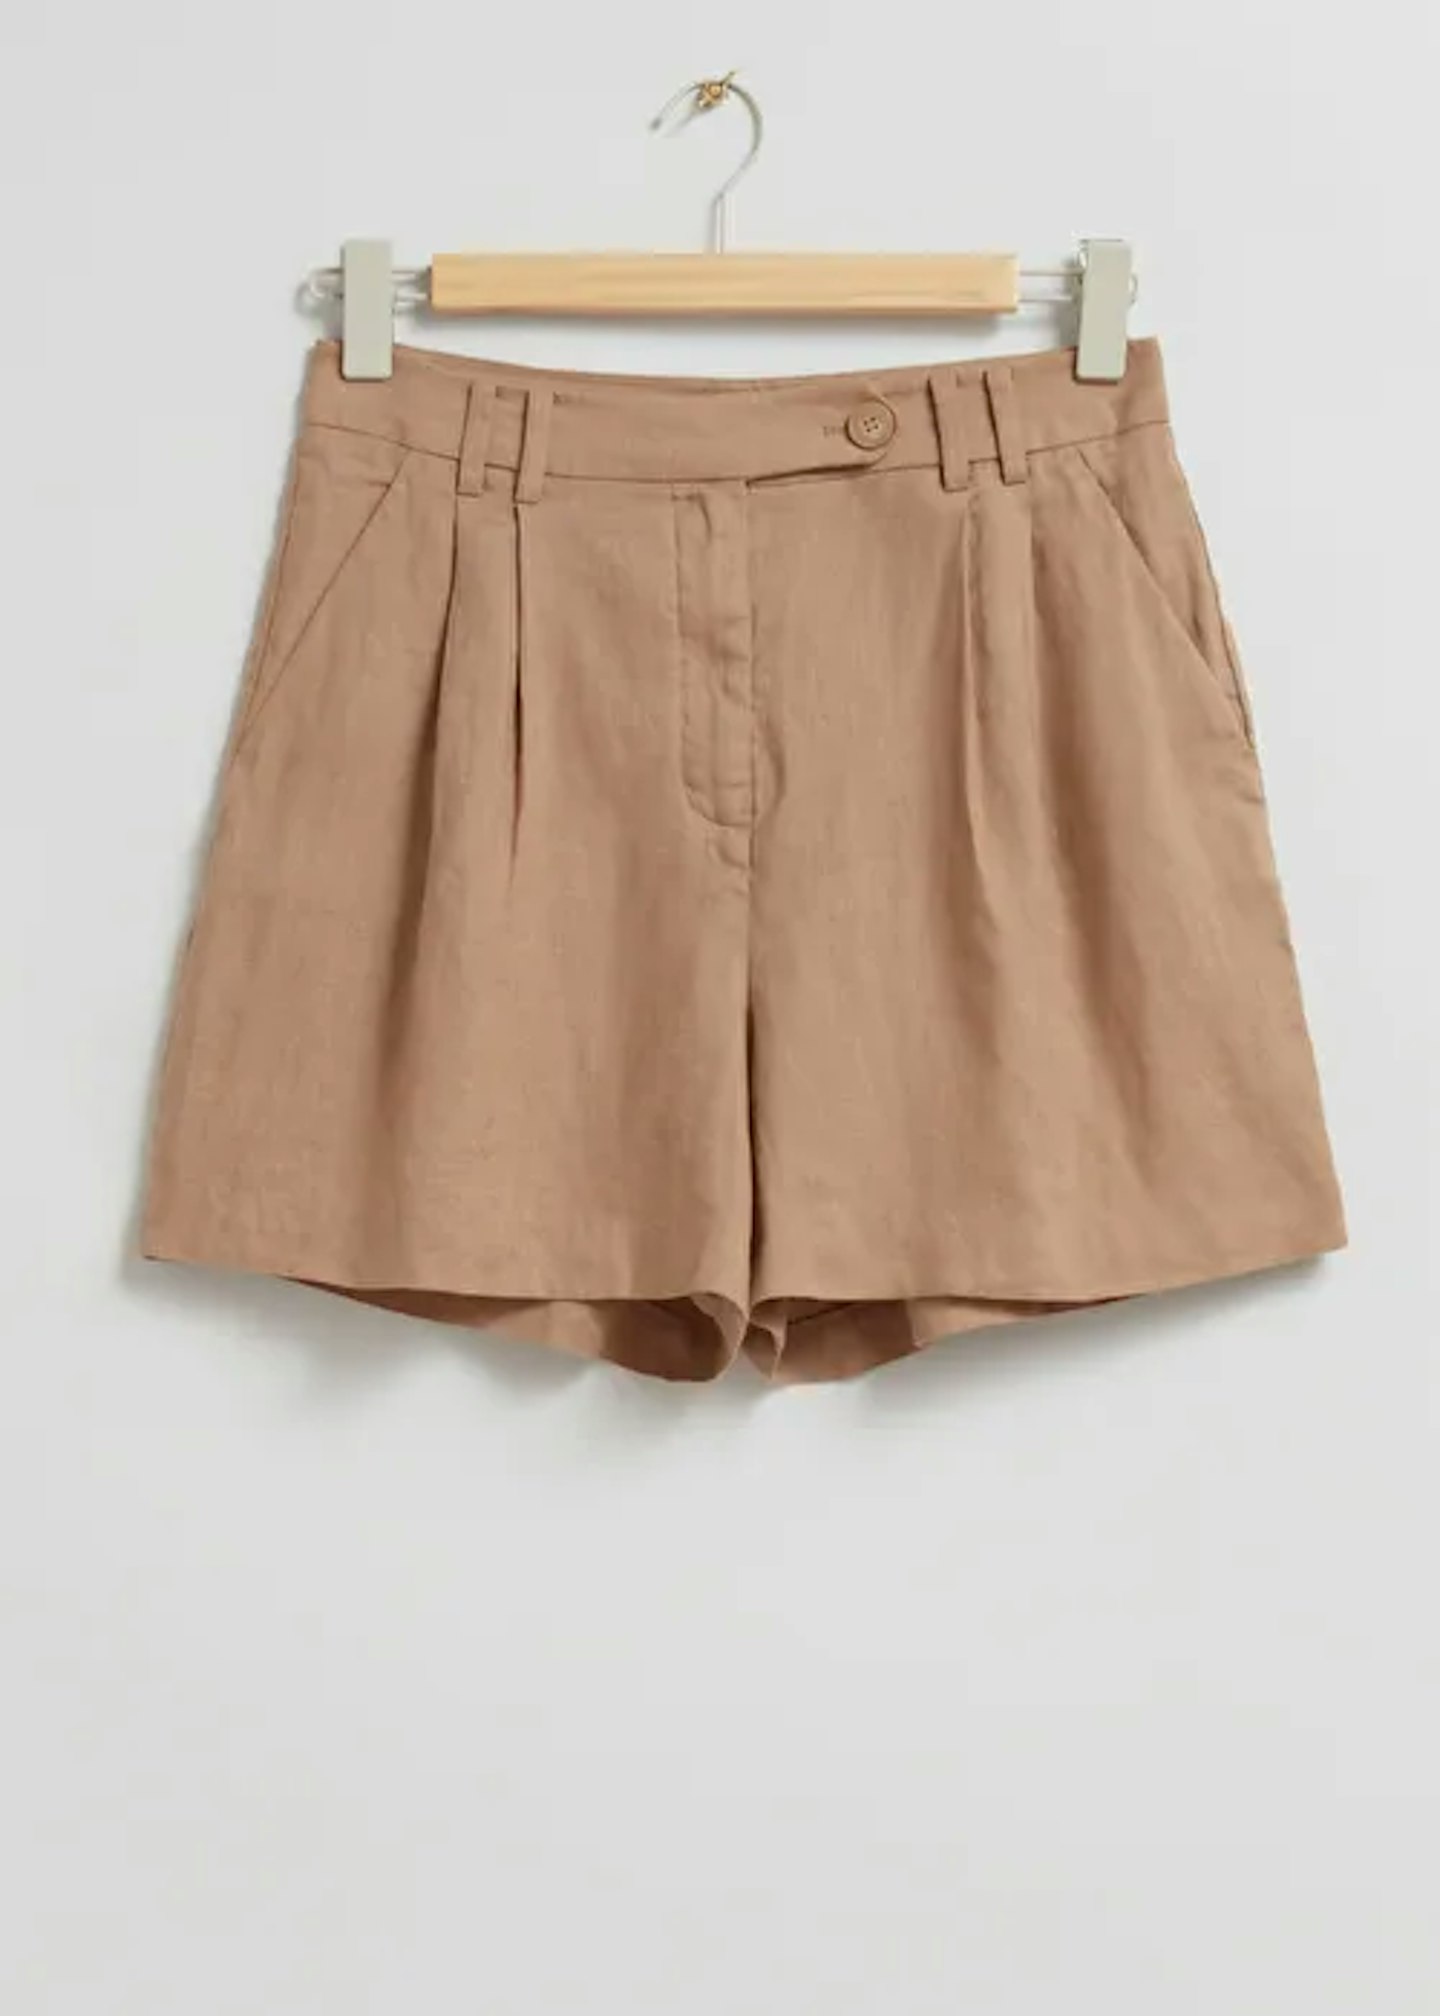 & Other Stories, Relaxed Linen Shorts